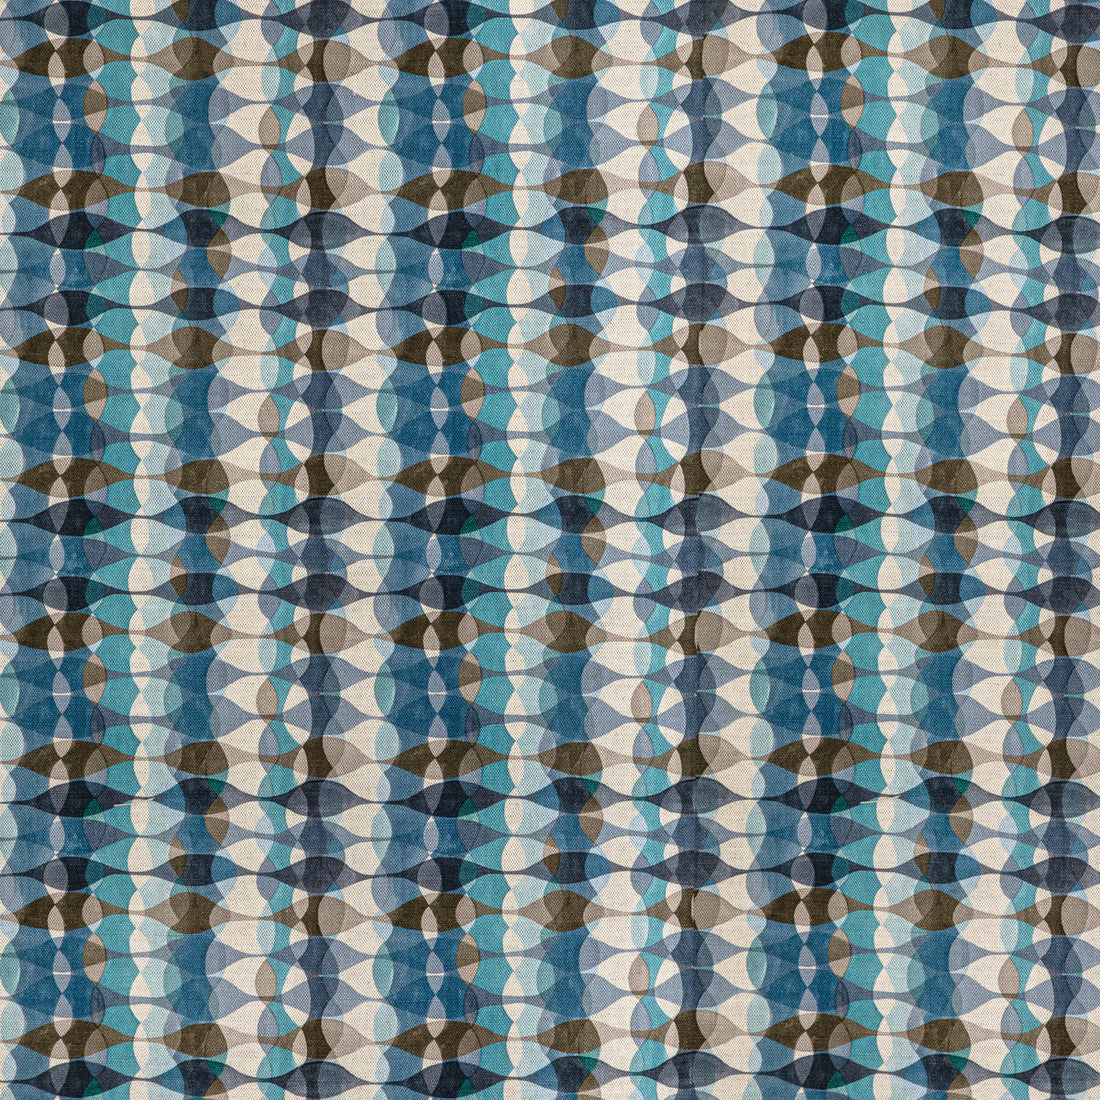 Overtone Print fabric in denim color - pattern GWF-3775.650.0 - by Lee Jofa Modern in the Rhapsody collection